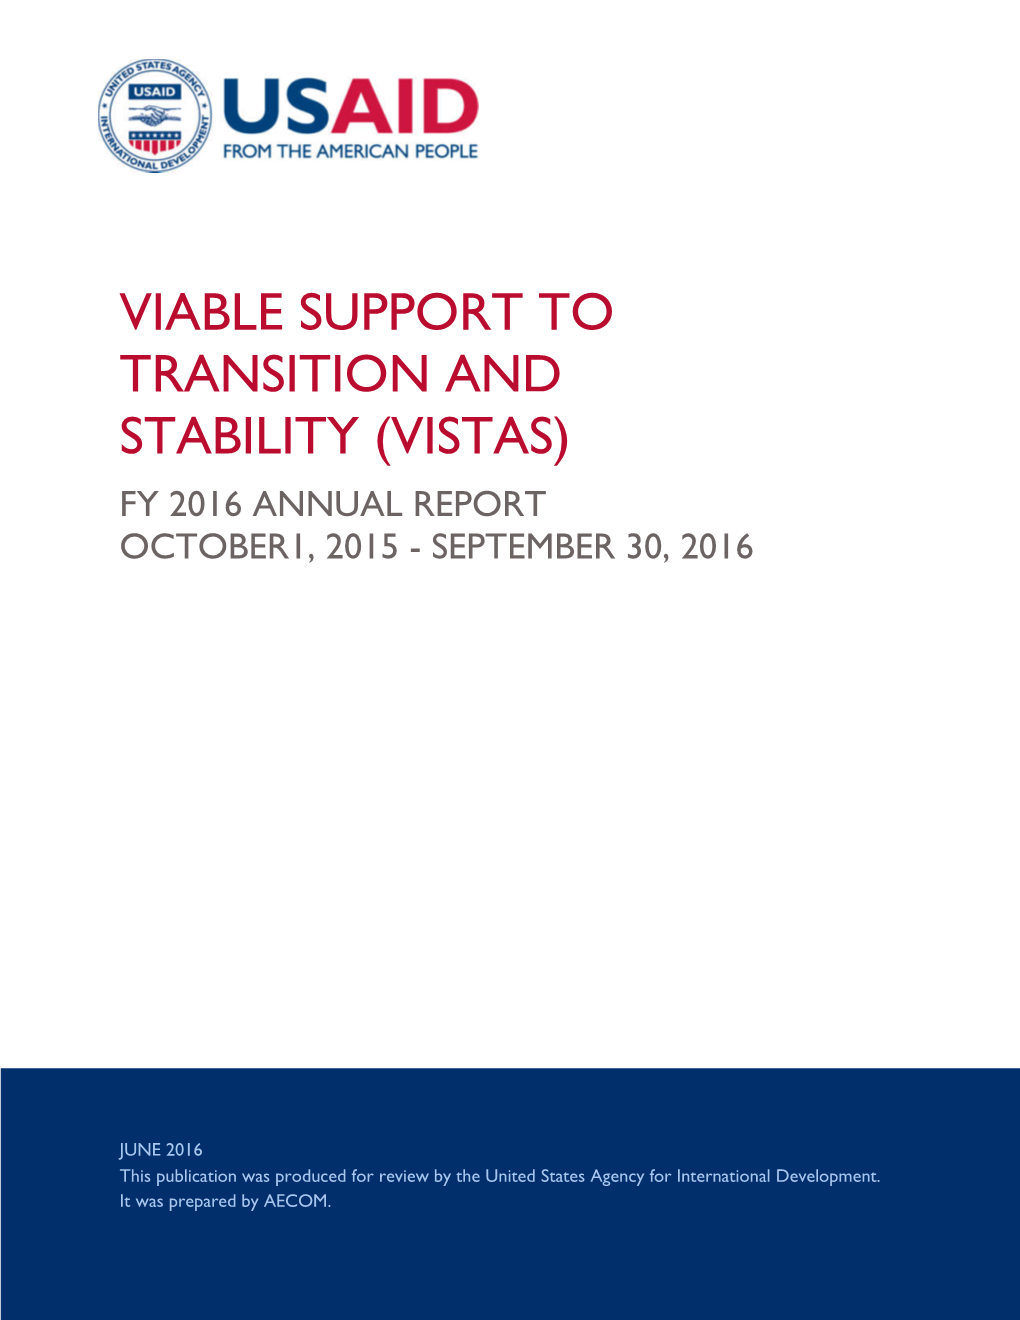 Viable Support to Transition and Stability (Vistas) Fy 2016 Annual Report October1, 2015 - September 30, 2016